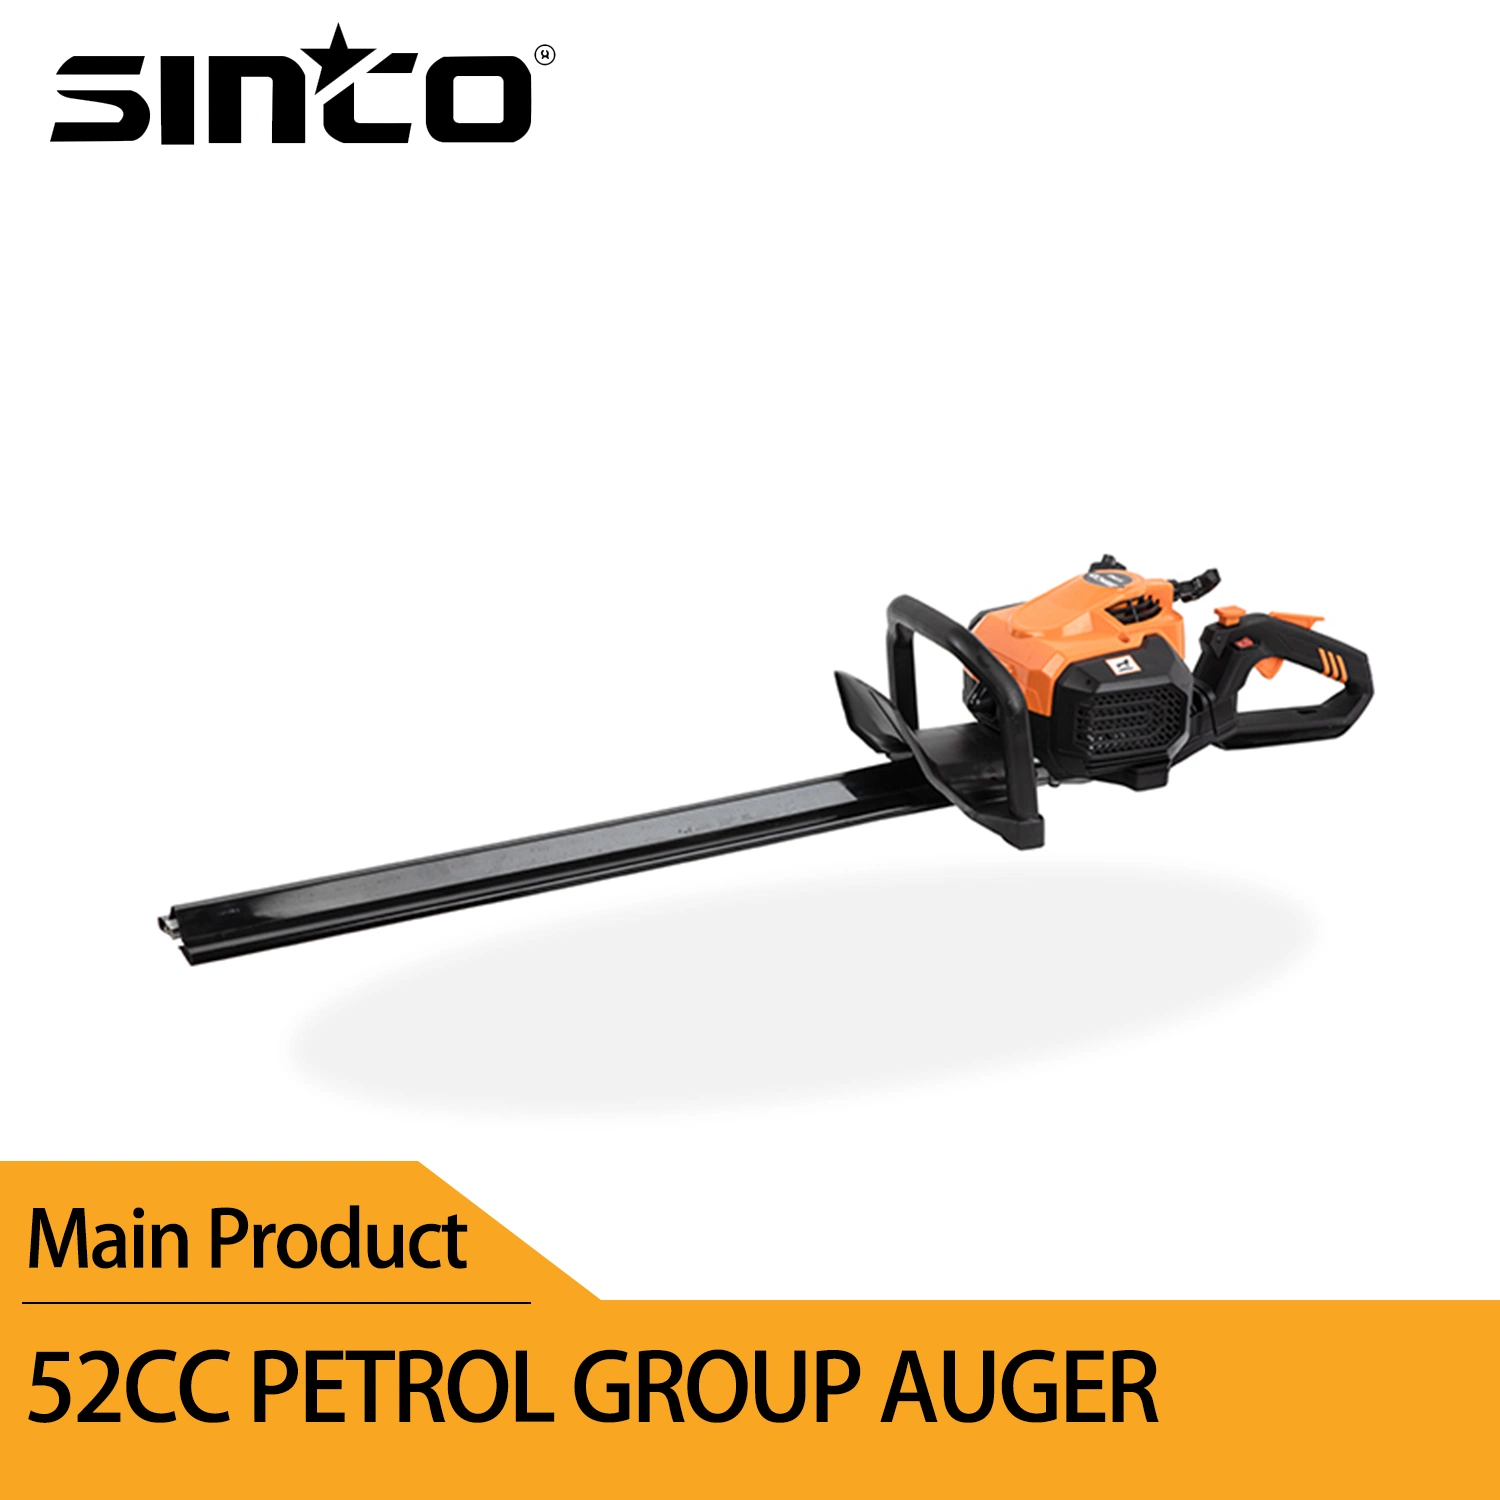 Factory Professional Garden Power Tool Hedge Trimmer 25.4cc 2 Stroke Dual Tooth Blade Gasoline Hedge Trimmer